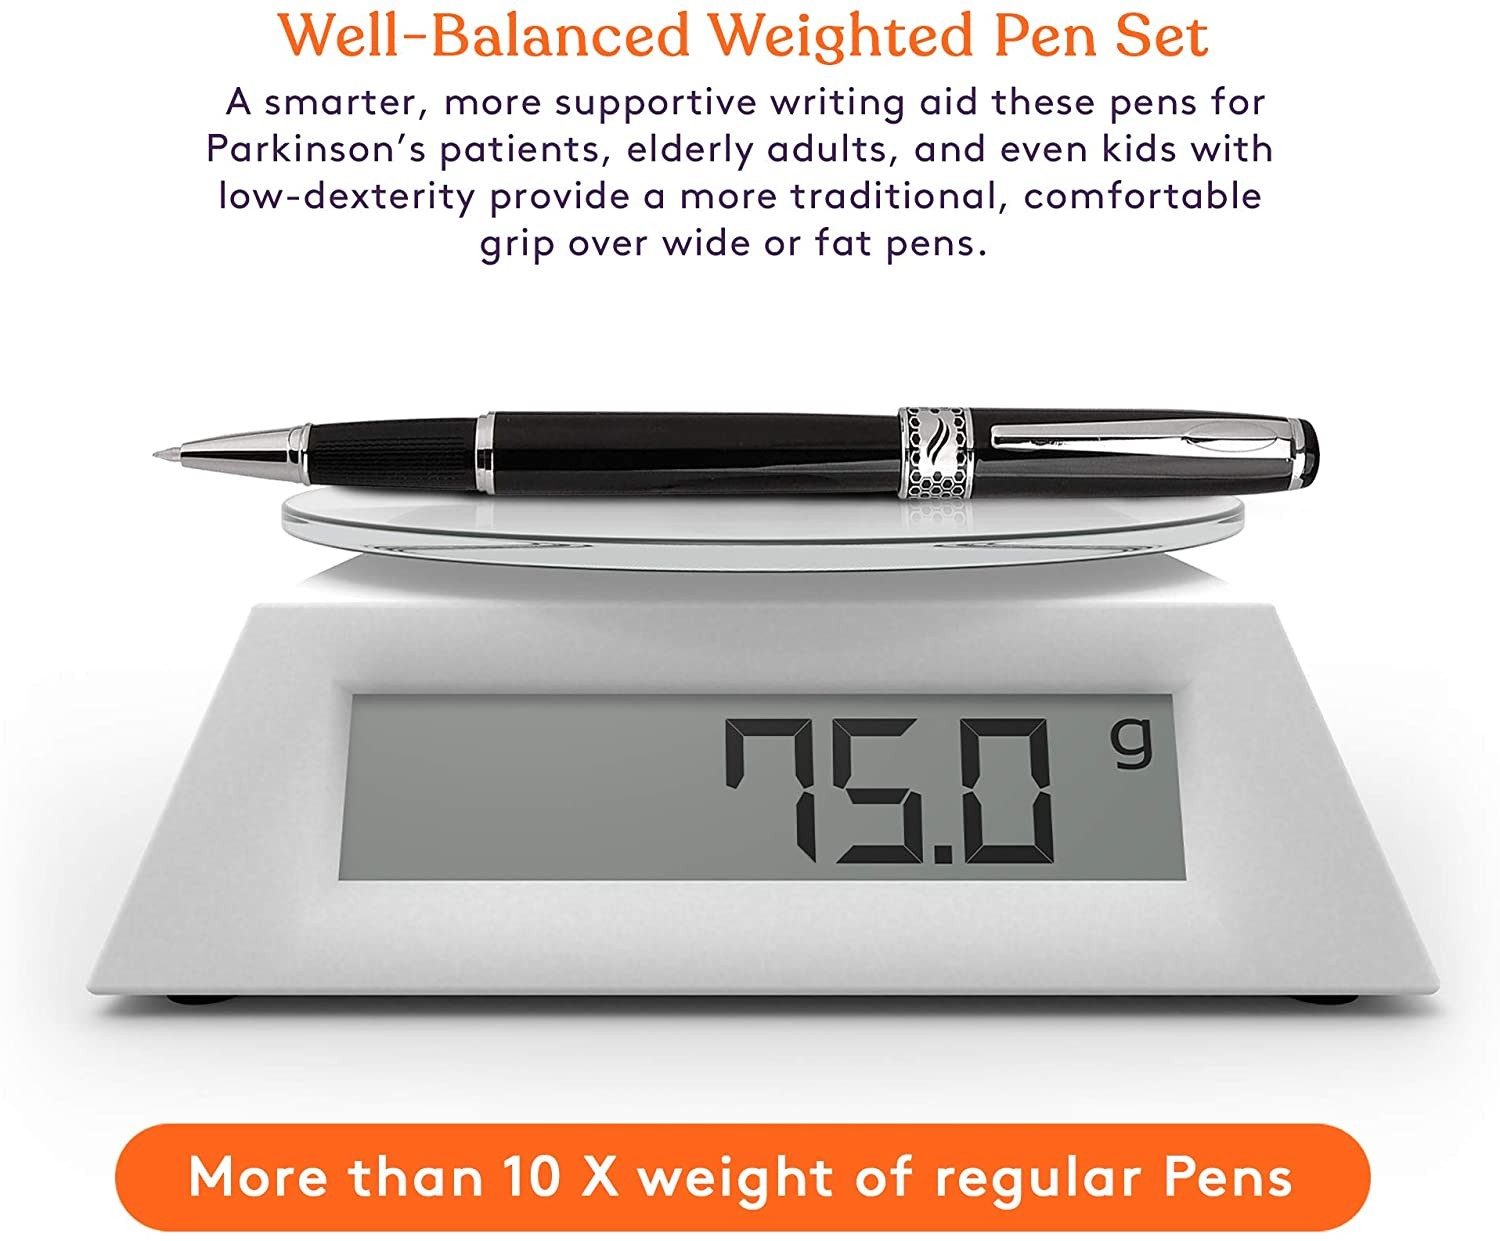  HEAVIER Weighted Pens for Hand Tremors, Parkinsons Patients,  Arthritis Hand, Carpal Tunnel Syndrome & Low Grip Strength - Big Fat Pens  to Help Elderly - Weighted Wide Grip Pens (2